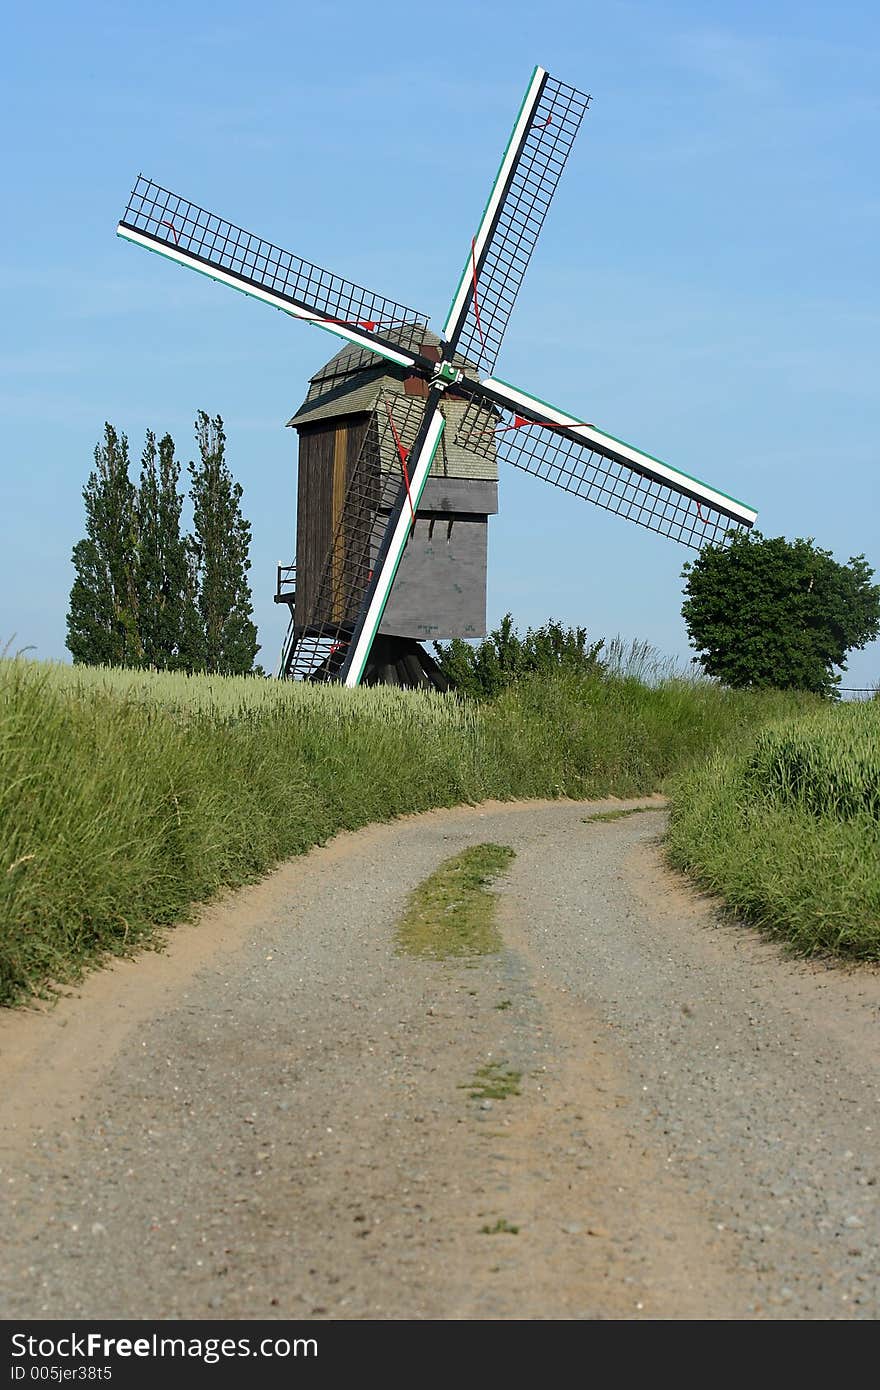 A road leading to a windmill in Belgium.